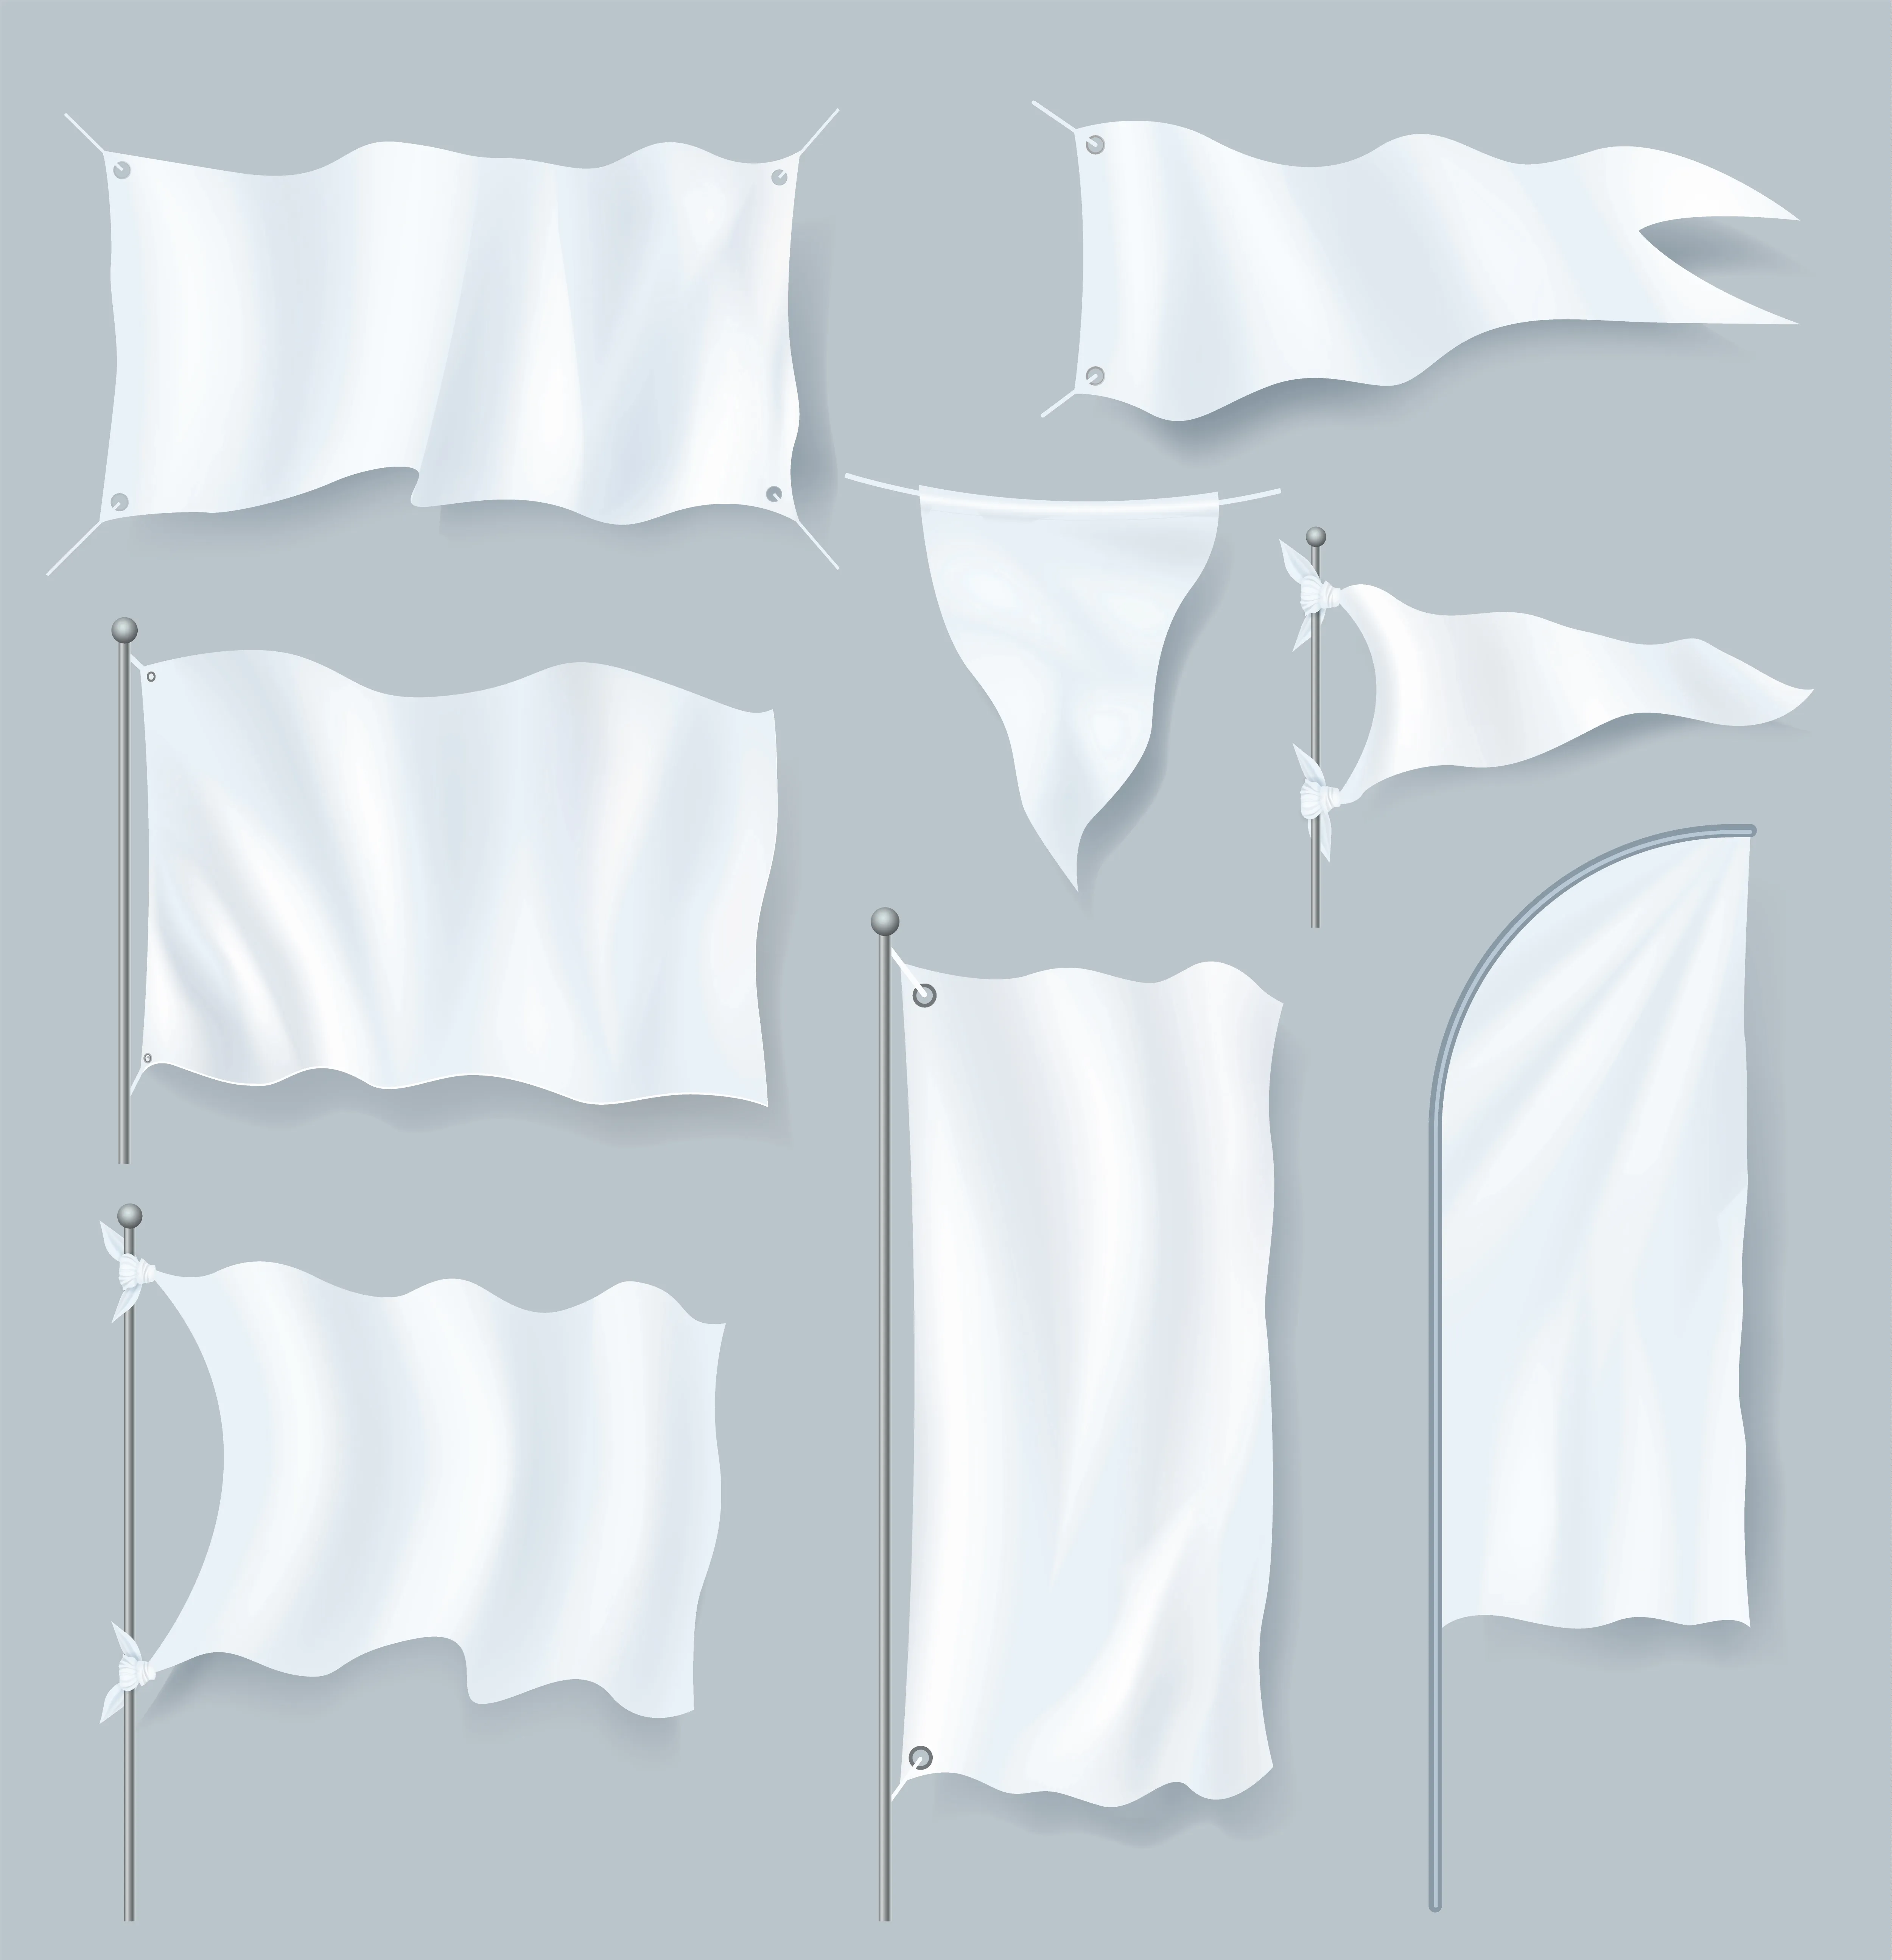 Realistic textile banner and flag set